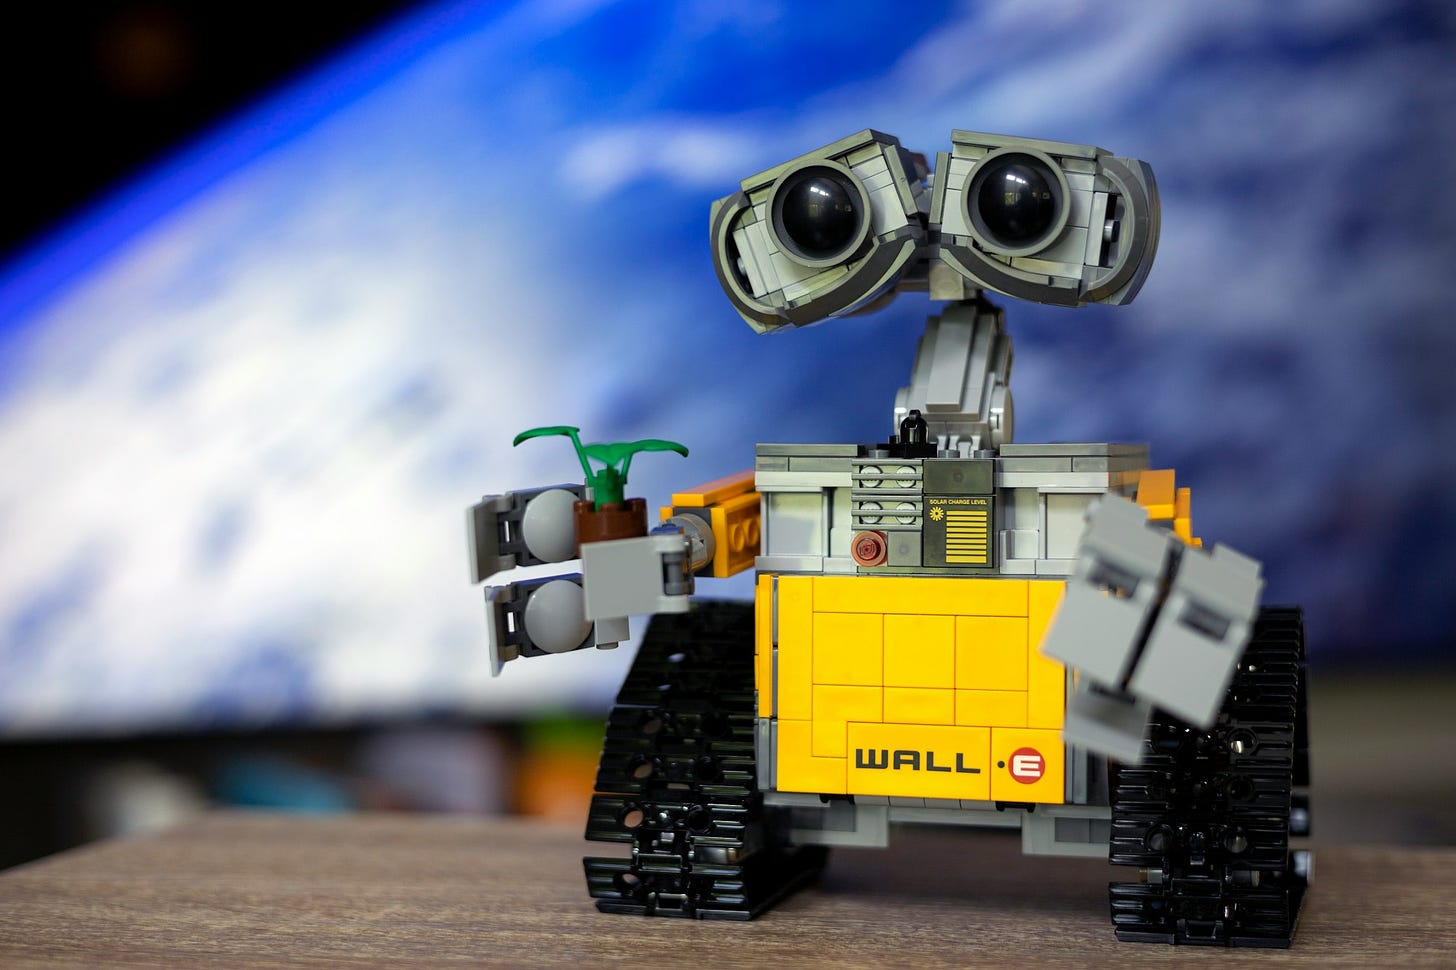 Portrait of LEGO Ideas WALL•E set.

Created by Angus MacLane, an animator and director at Pixar Animation Studios, and selected by LEGO Ideas members, the development of this model began alongside the making of the lovable animated character for the classic Pixar feature film, "WALL•E."